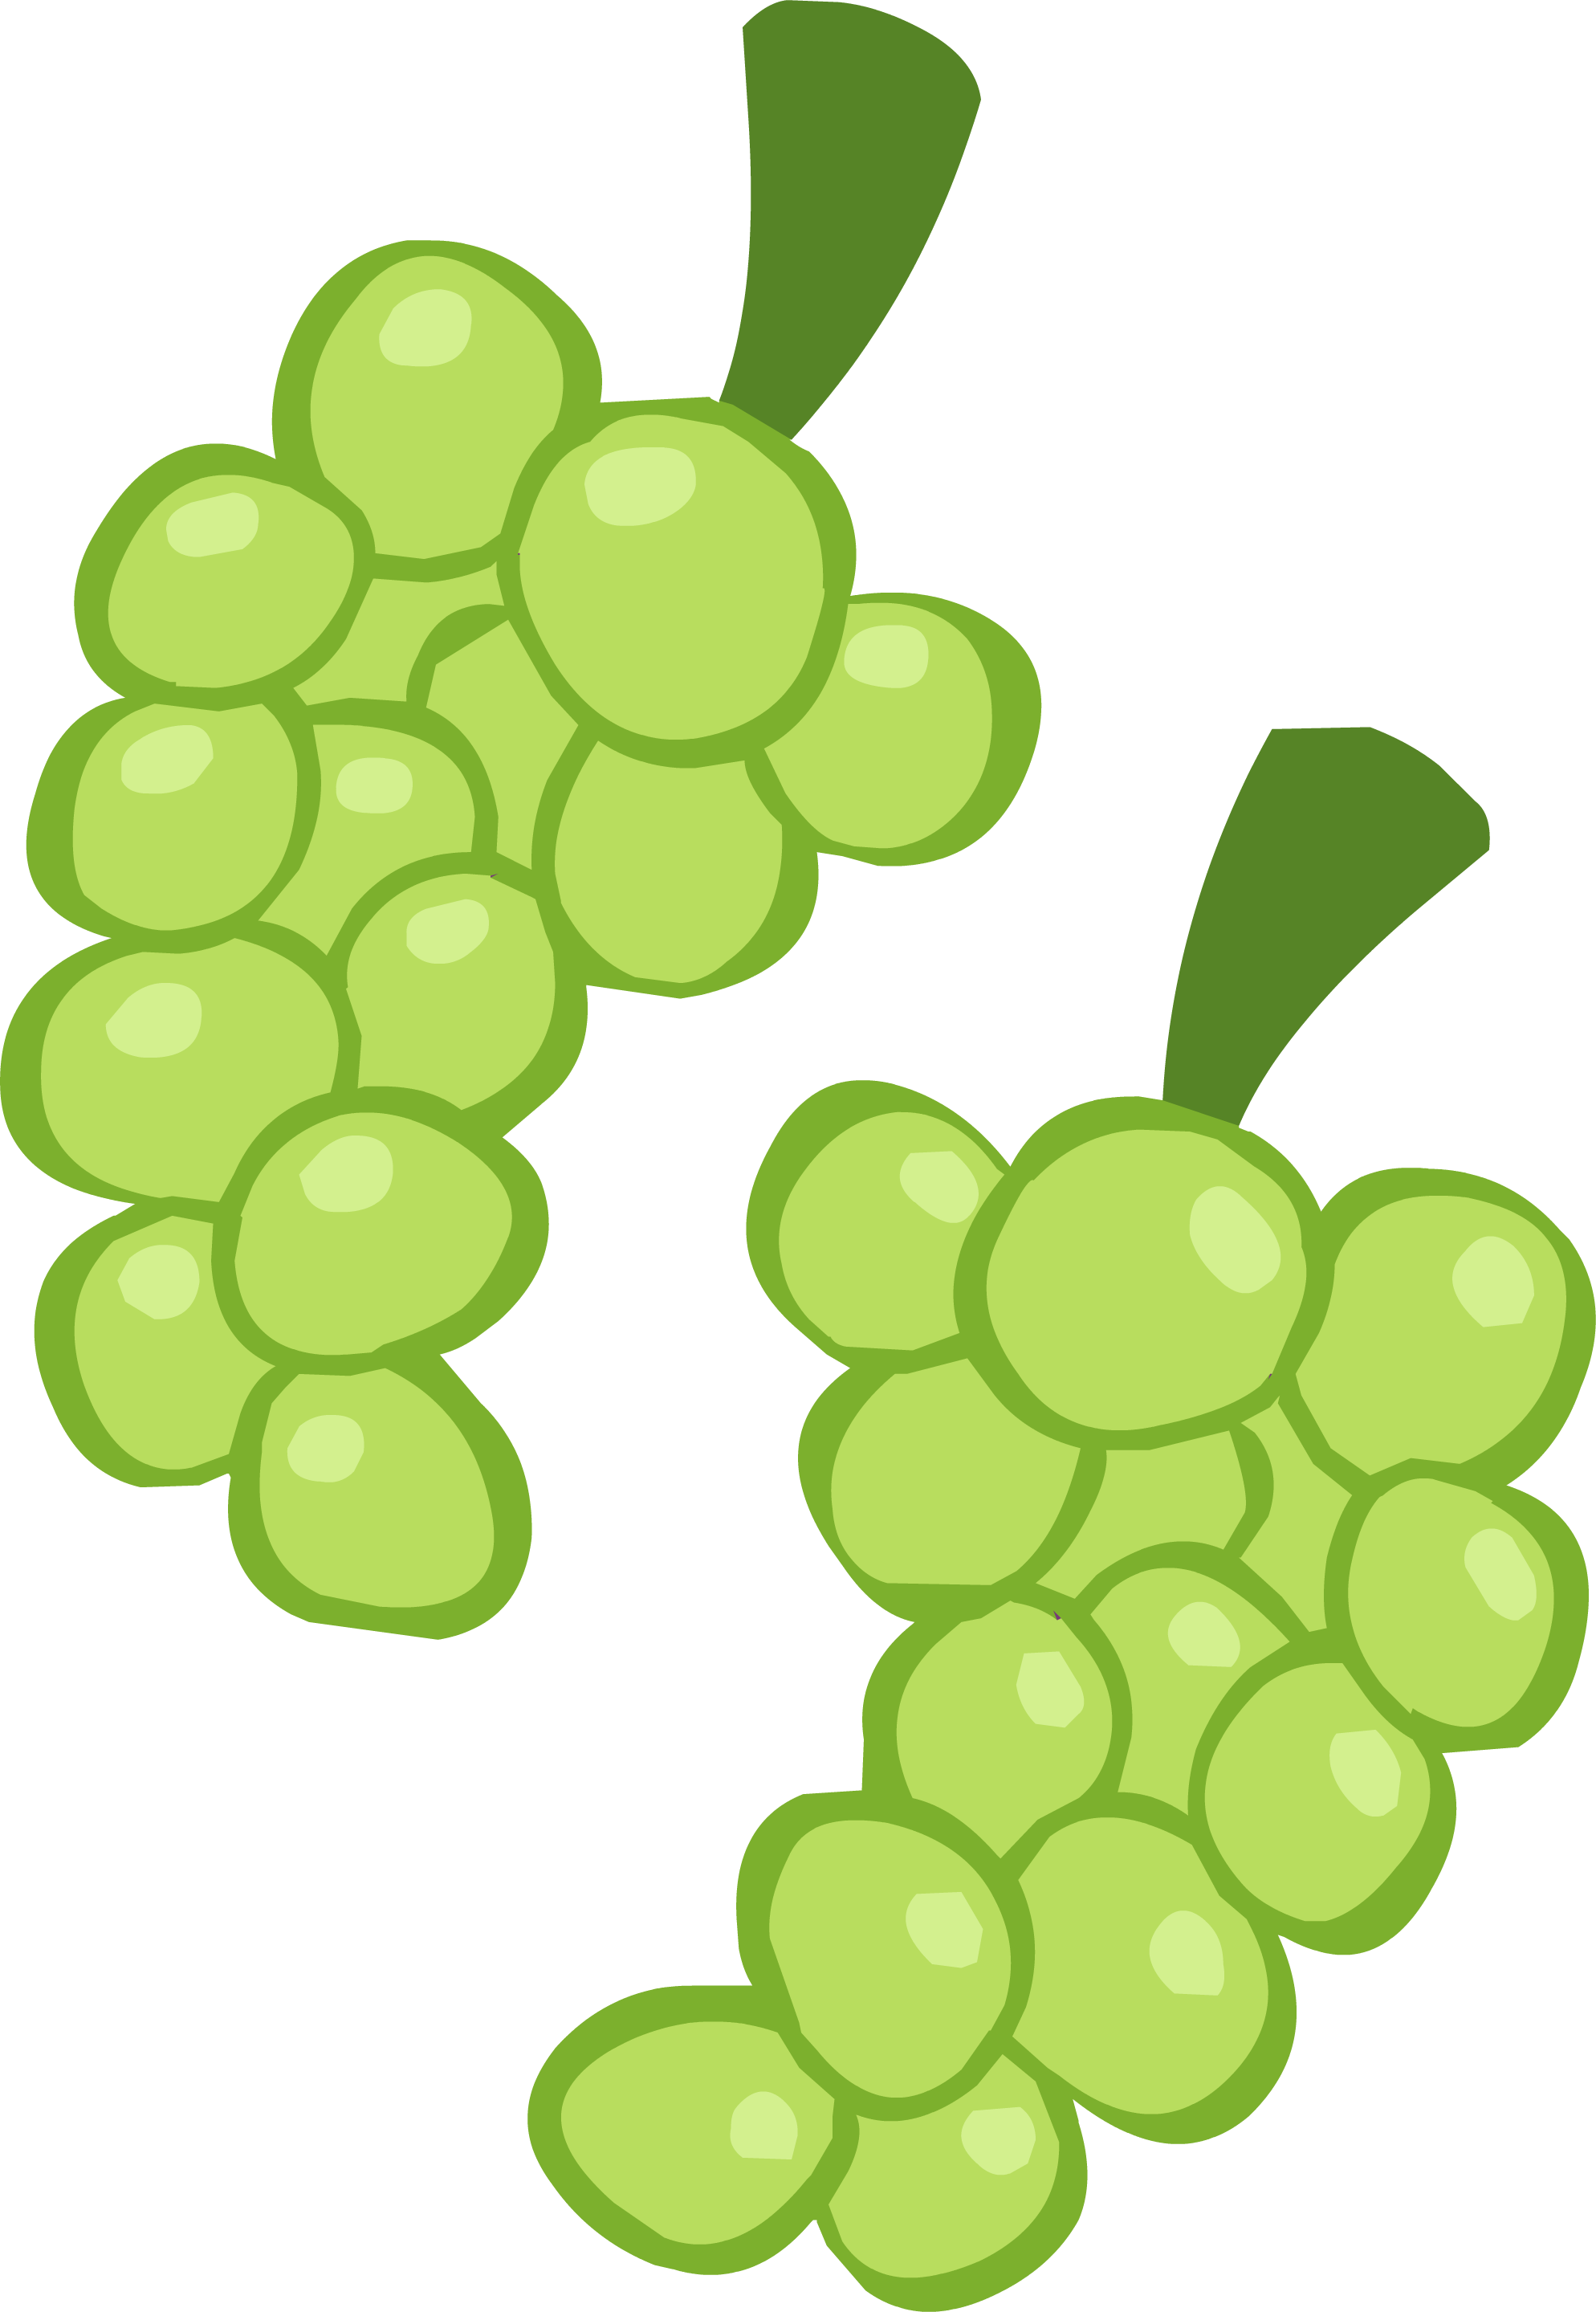 Ponymaker grapes free images at vector clip art